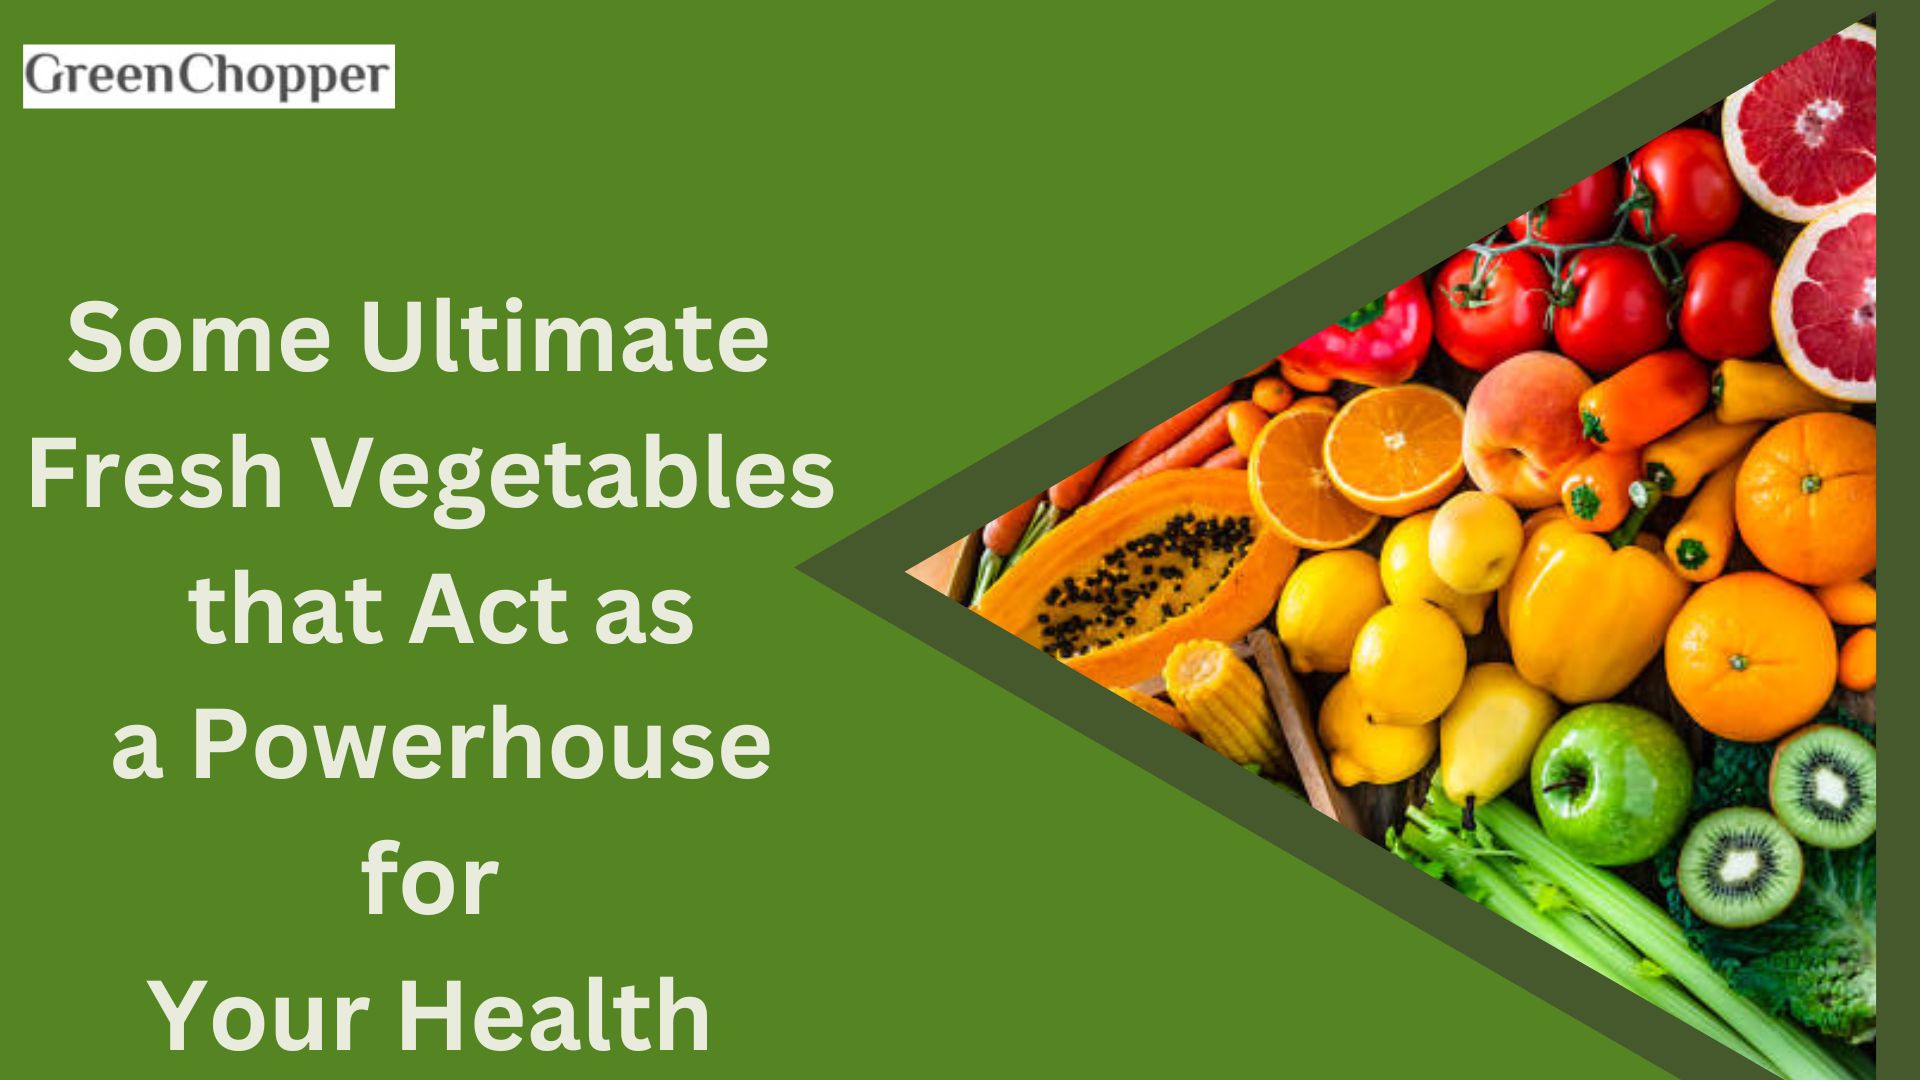 Some Ultimate Fresh Vegetables that Act as a Powerhouse for Your Health